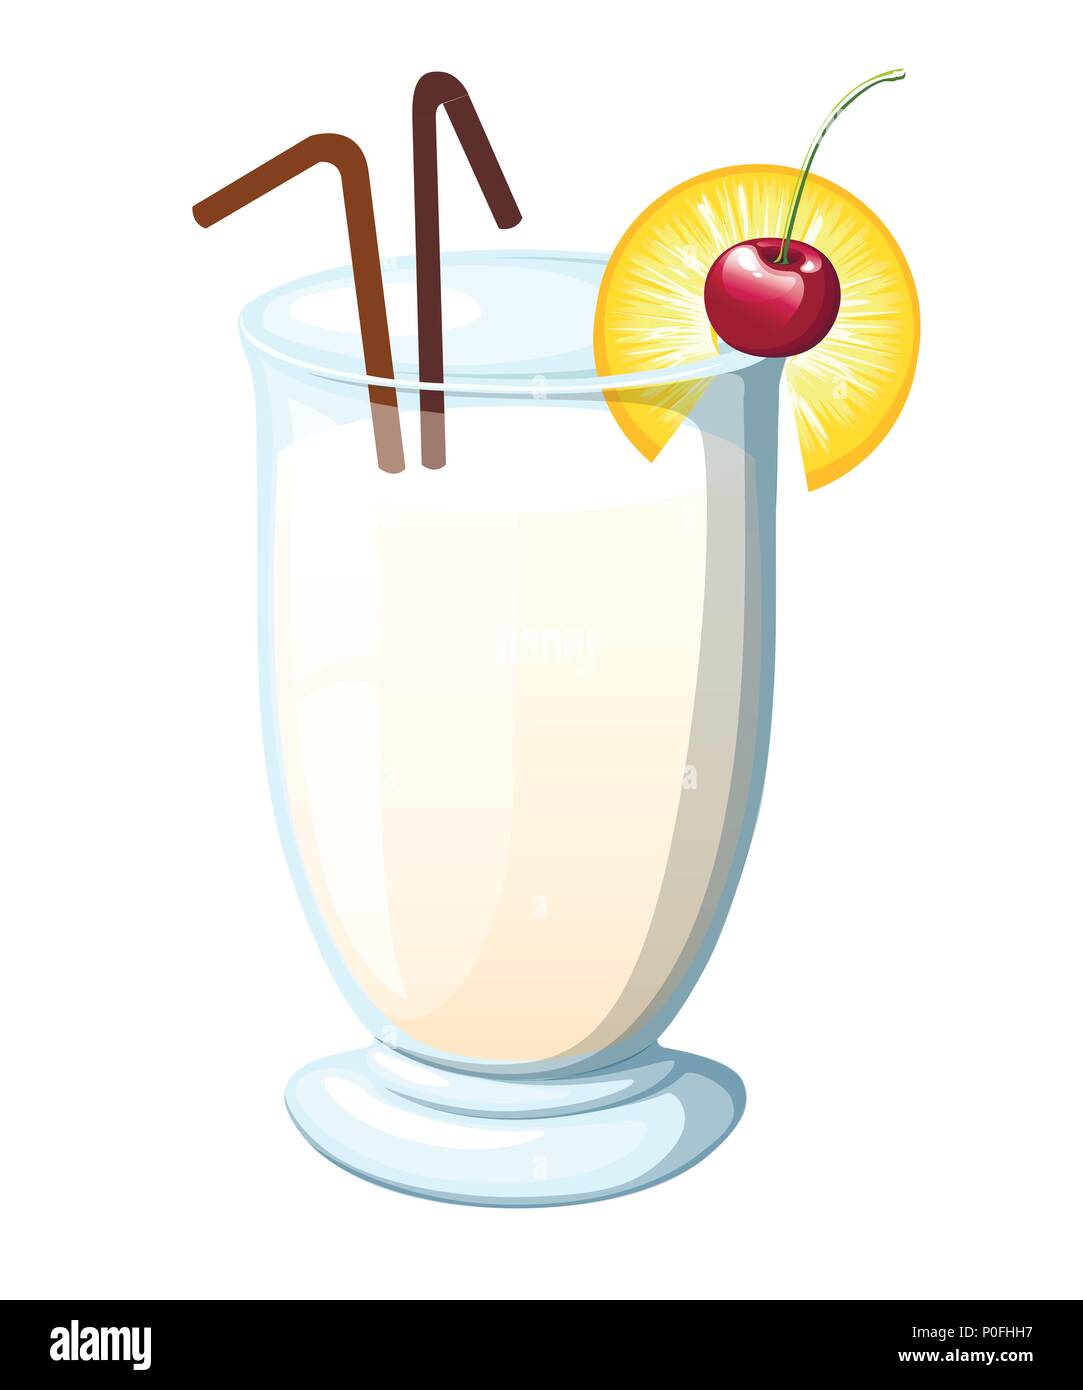 Pina Colada cocktail garnished with maraschino cherry. Pineapple wedge. Brown straw tubes. Flat vector illustration isolated on white background. Stock Vector